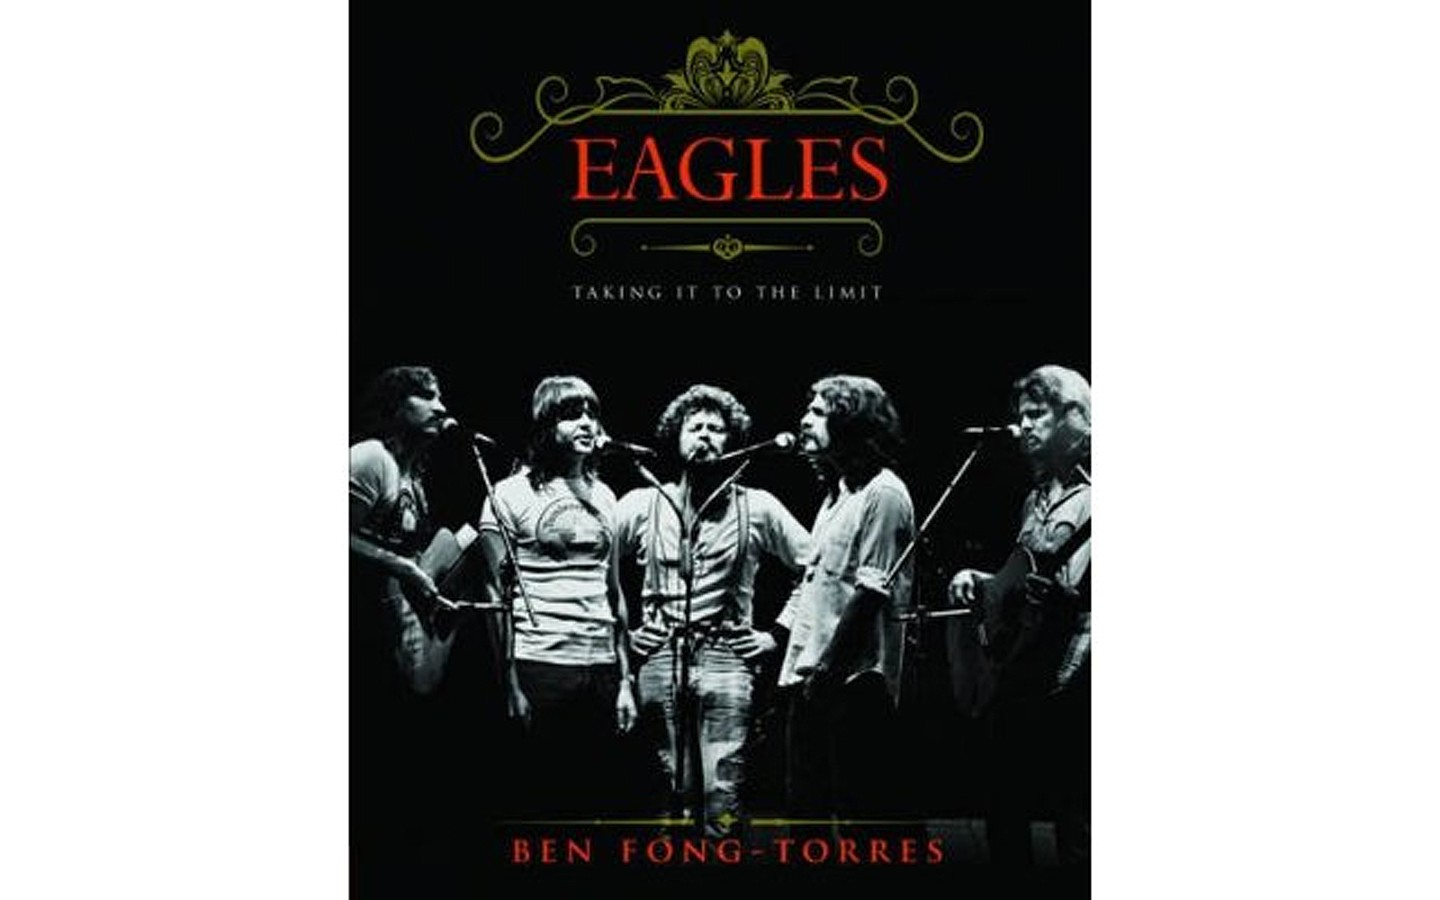 Eagles: Taking It To The Limit - BY BEN FONG-TORRES - RUNNING PRESS